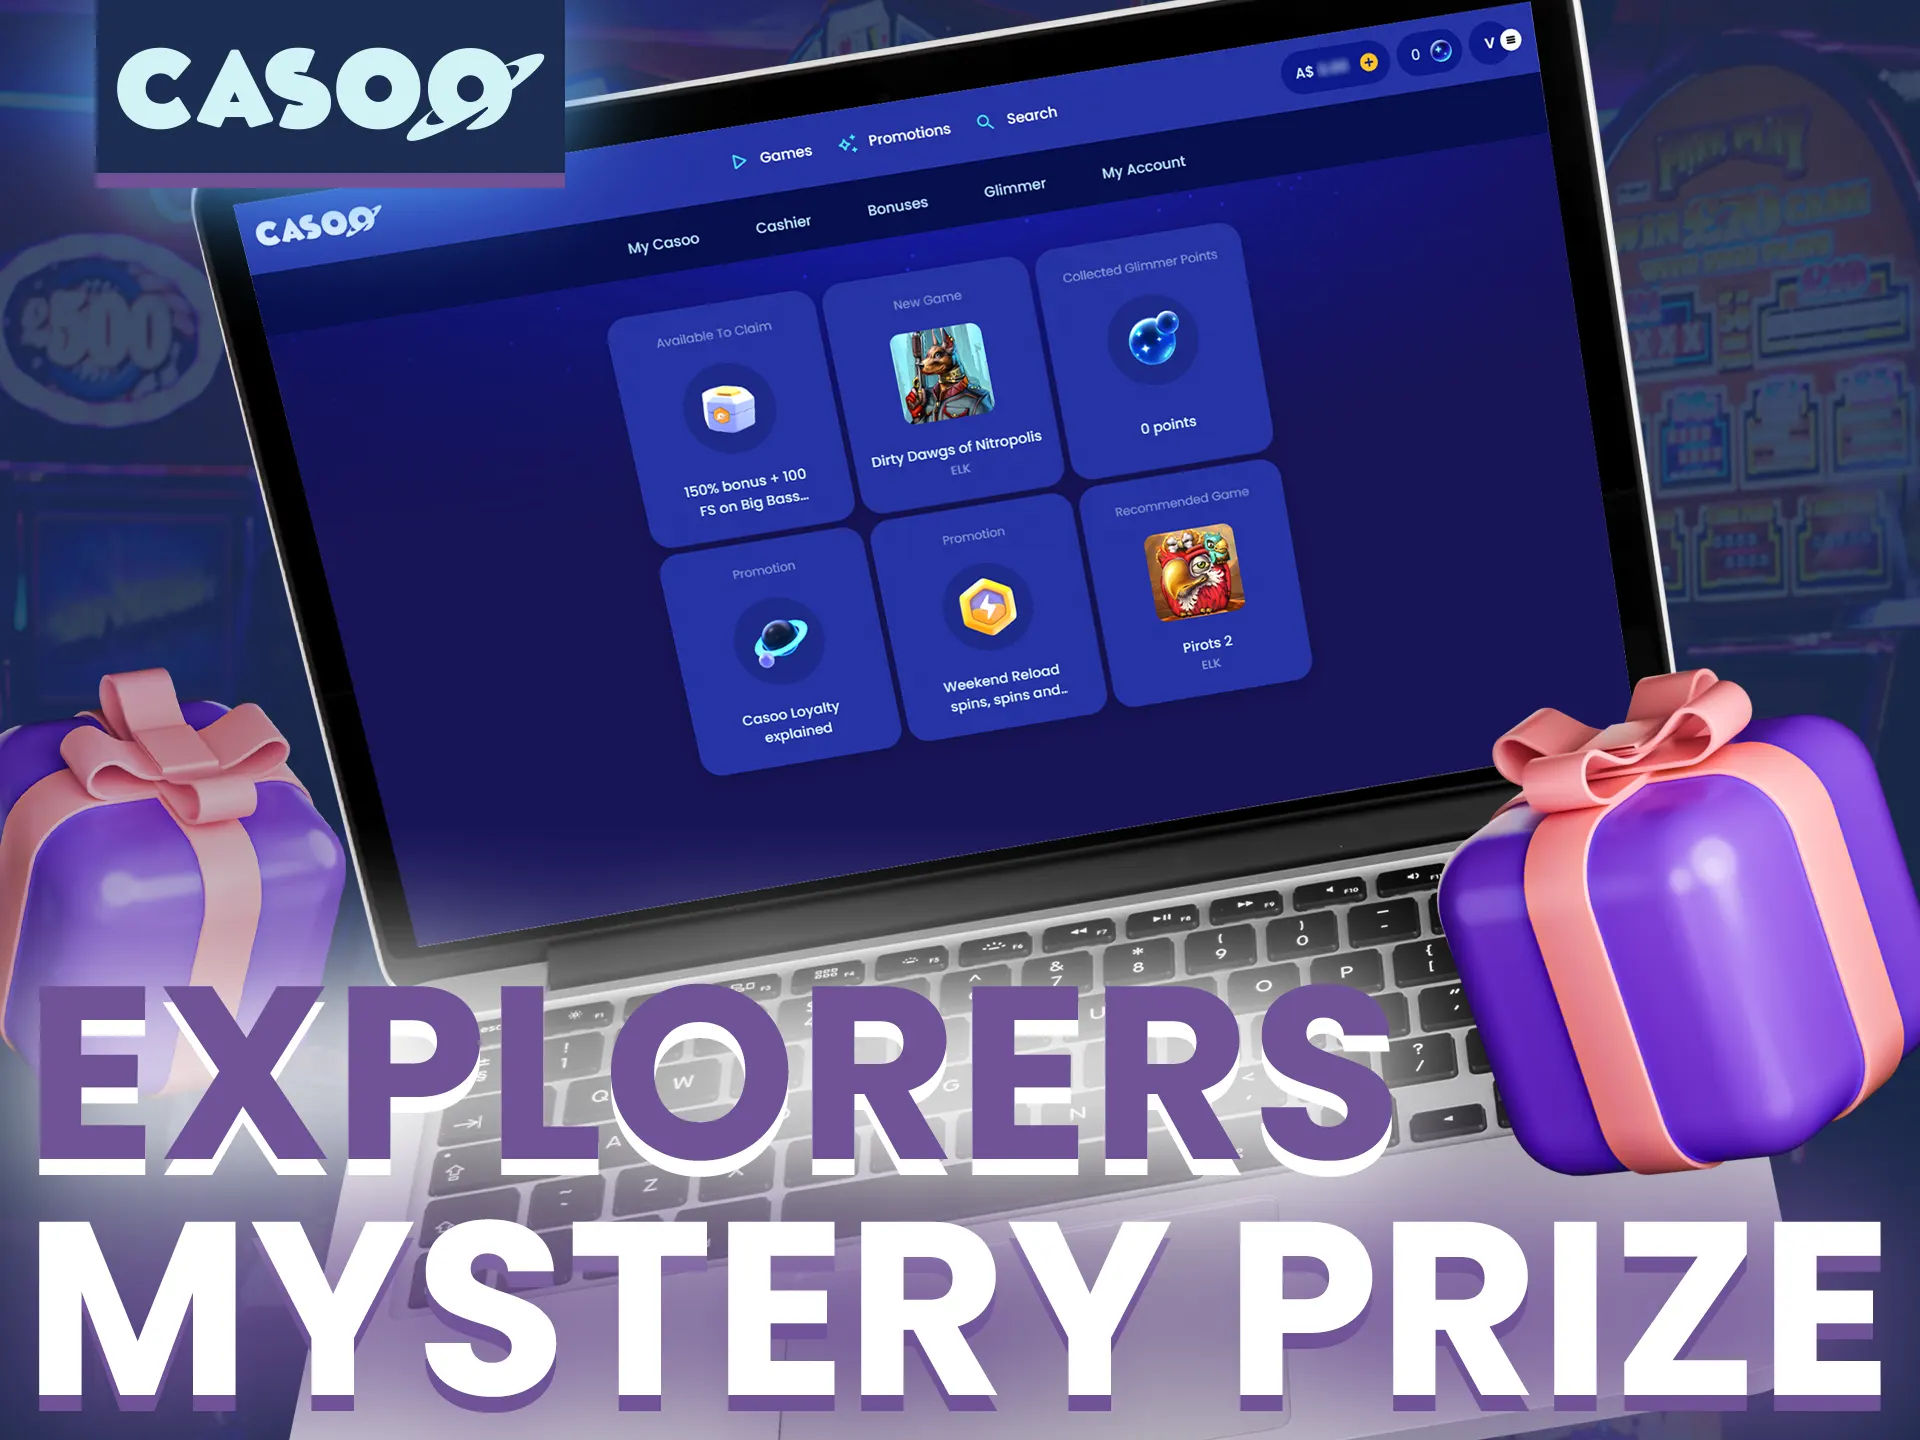 With Casoo's unique achievement system, you'll be able to claim a mystery prize.